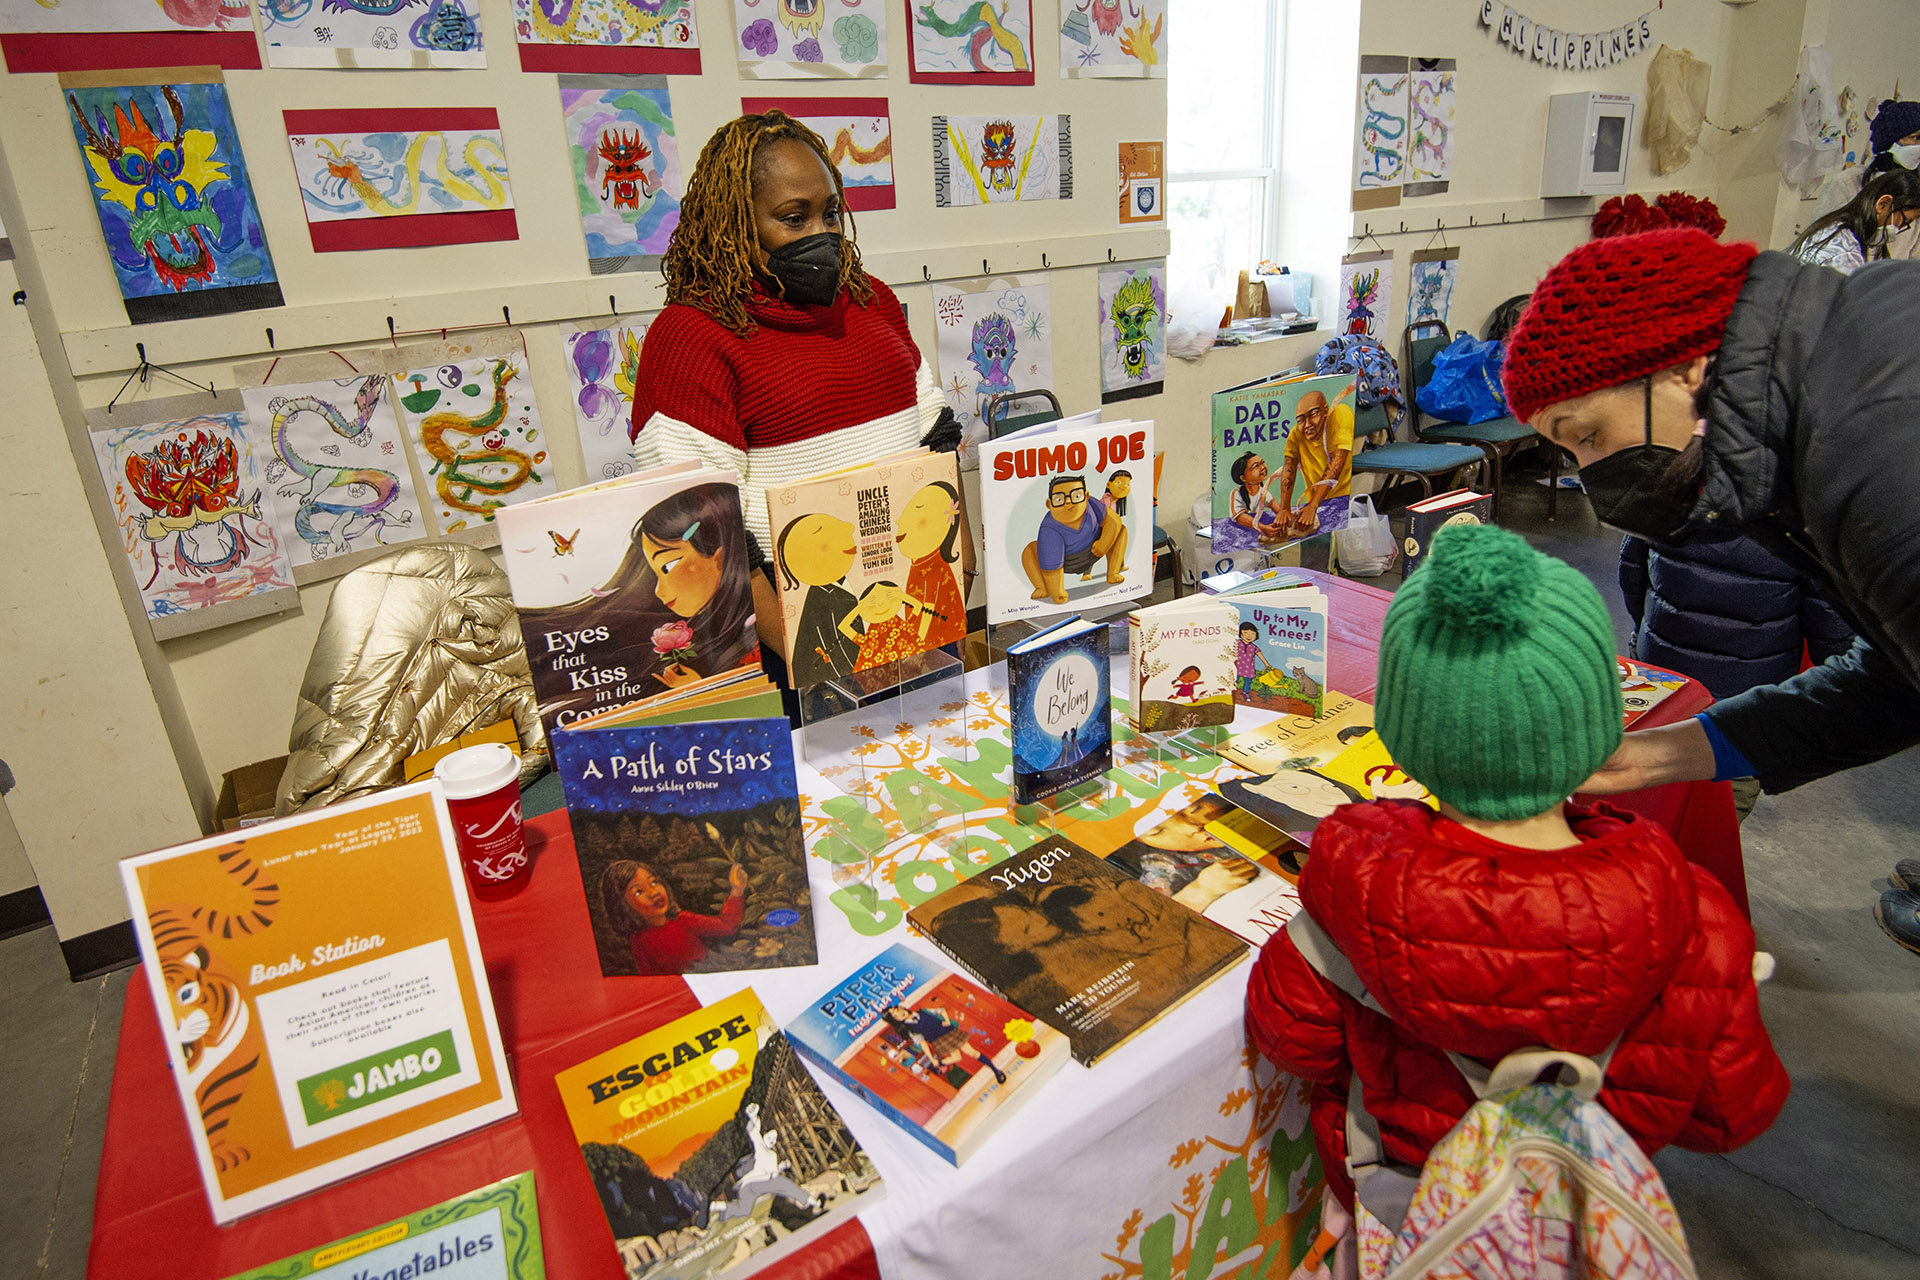 Jambo Books owner Mijha Godfrey with her display of books starring children of color at the Lunar New Year Celebration at Legacy Park in Decatur on Saturday, Jan. 29. 2022. Photo by Dean Hesse.